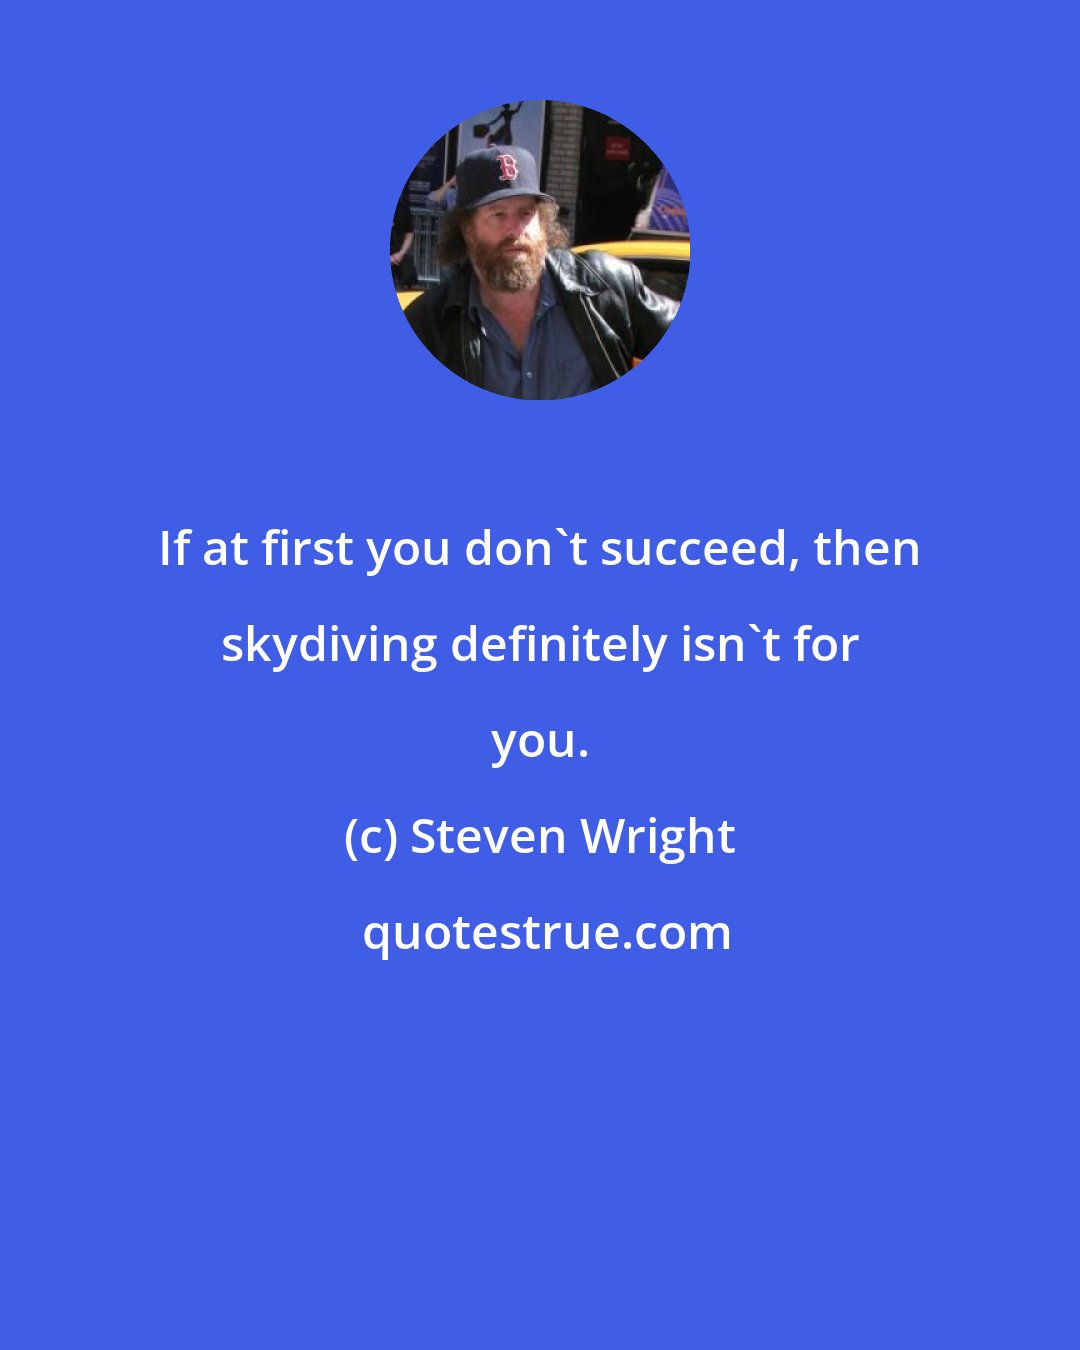 Steven Wright: If at first you don't succeed, then skydiving definitely isn't for you.